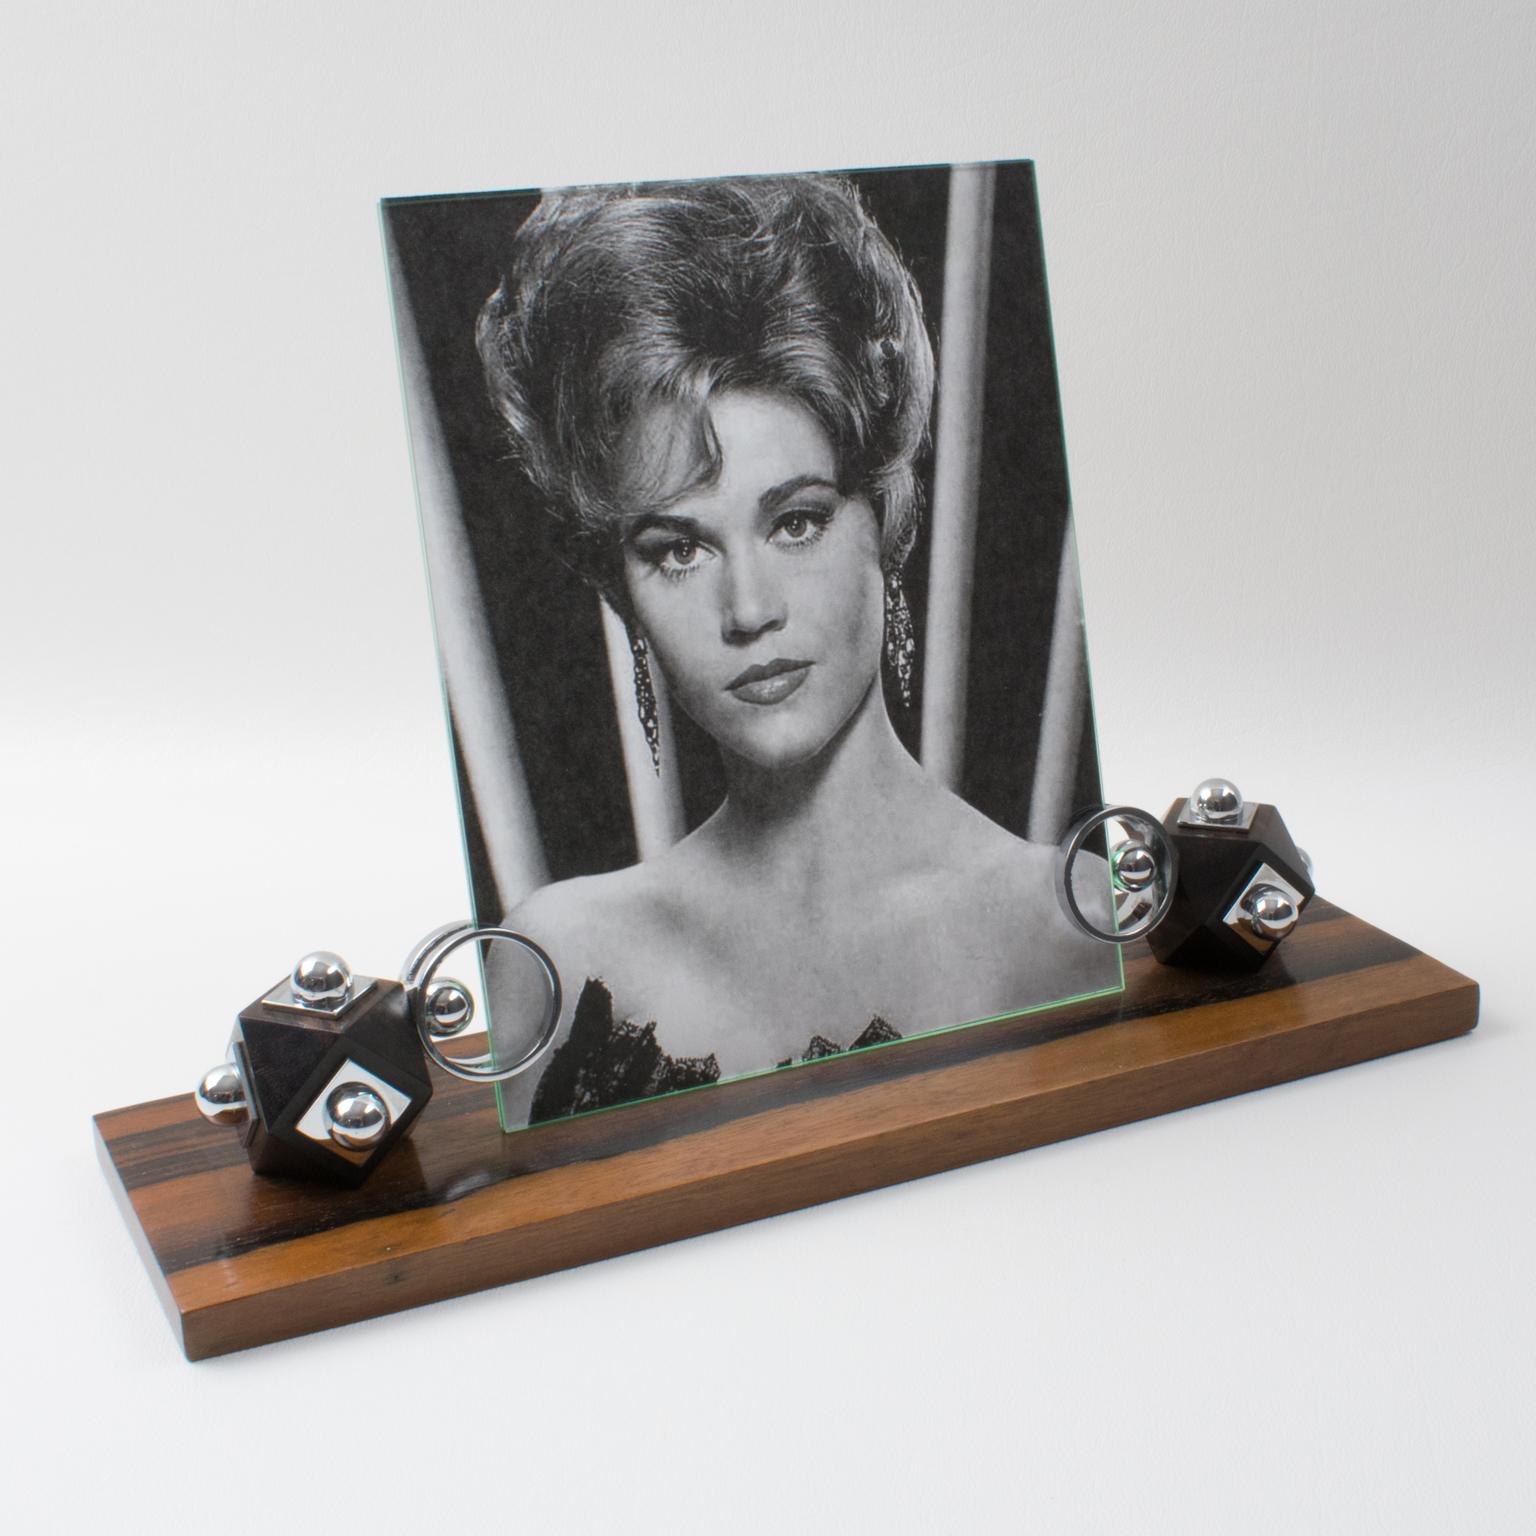 This Art Deco modernist picture photo frame features a thick hand-rubbed Macassar wood plinth complemented with cubic Macassar wood holders ornate with chrome accents. The piece is complete with two glass sheets to enclose the photography. There is